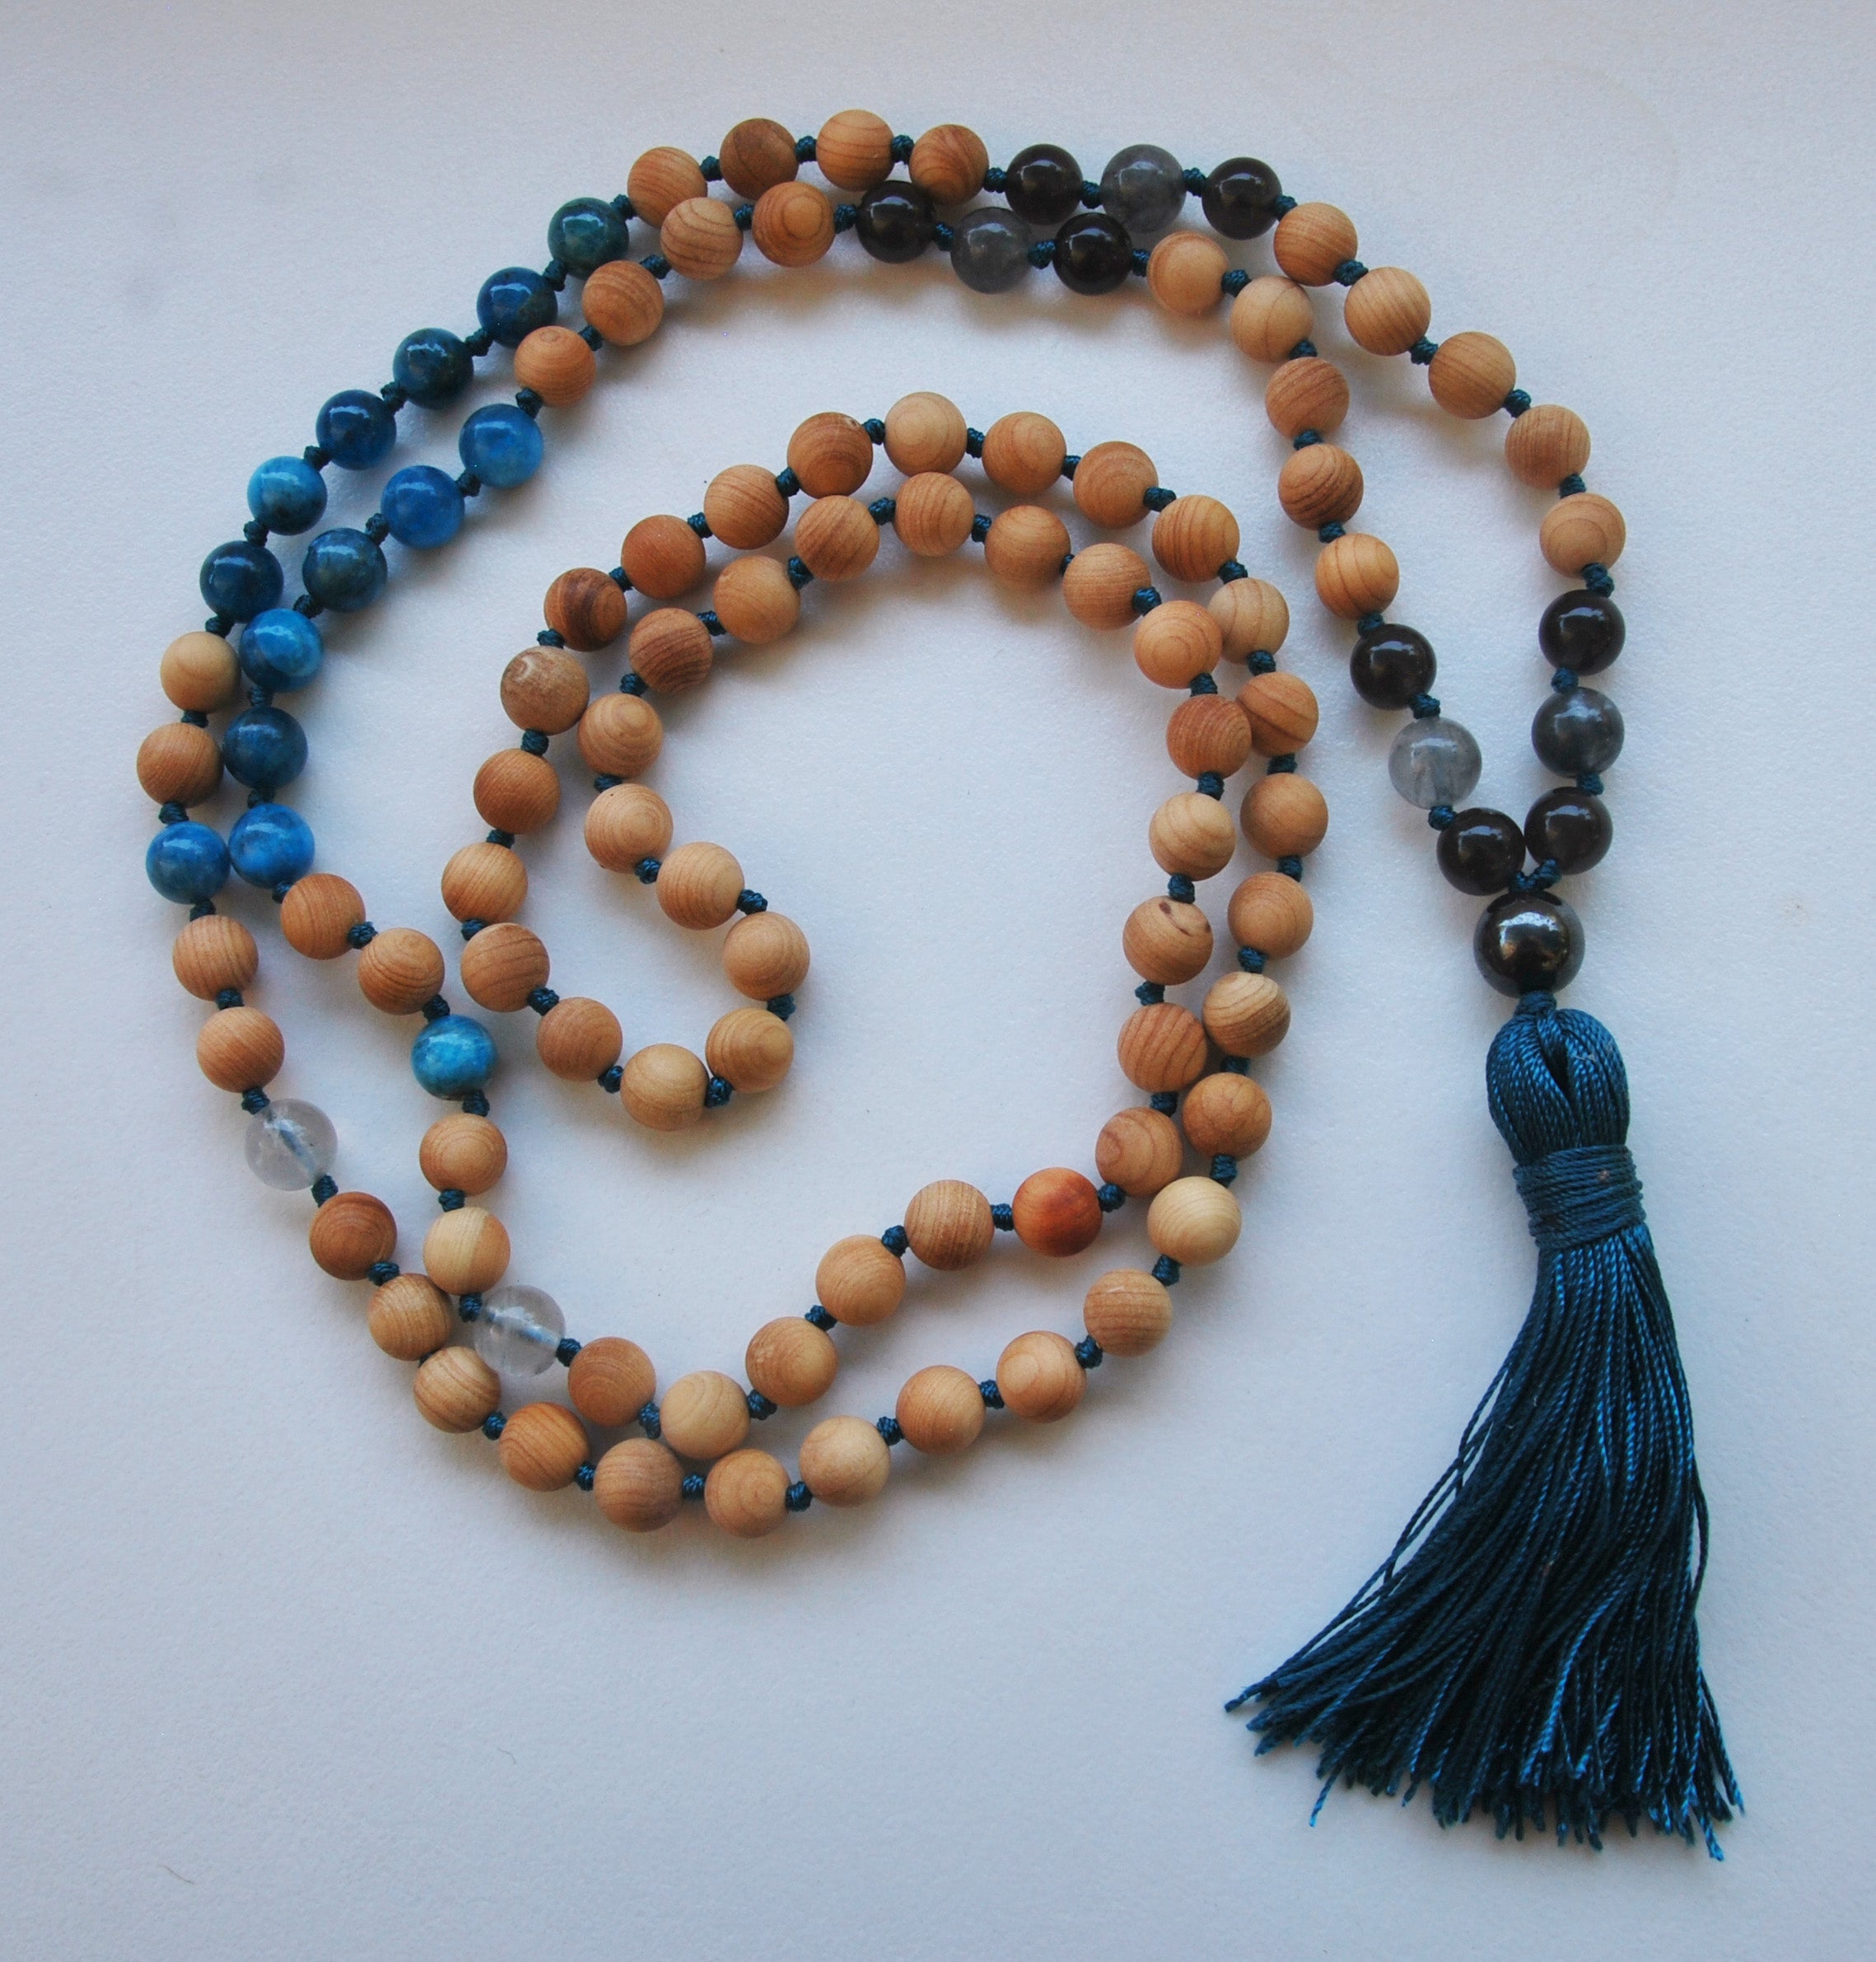 8mm Cypress & Apatite 108 Knotted Mala Necklace with Colored Tassel